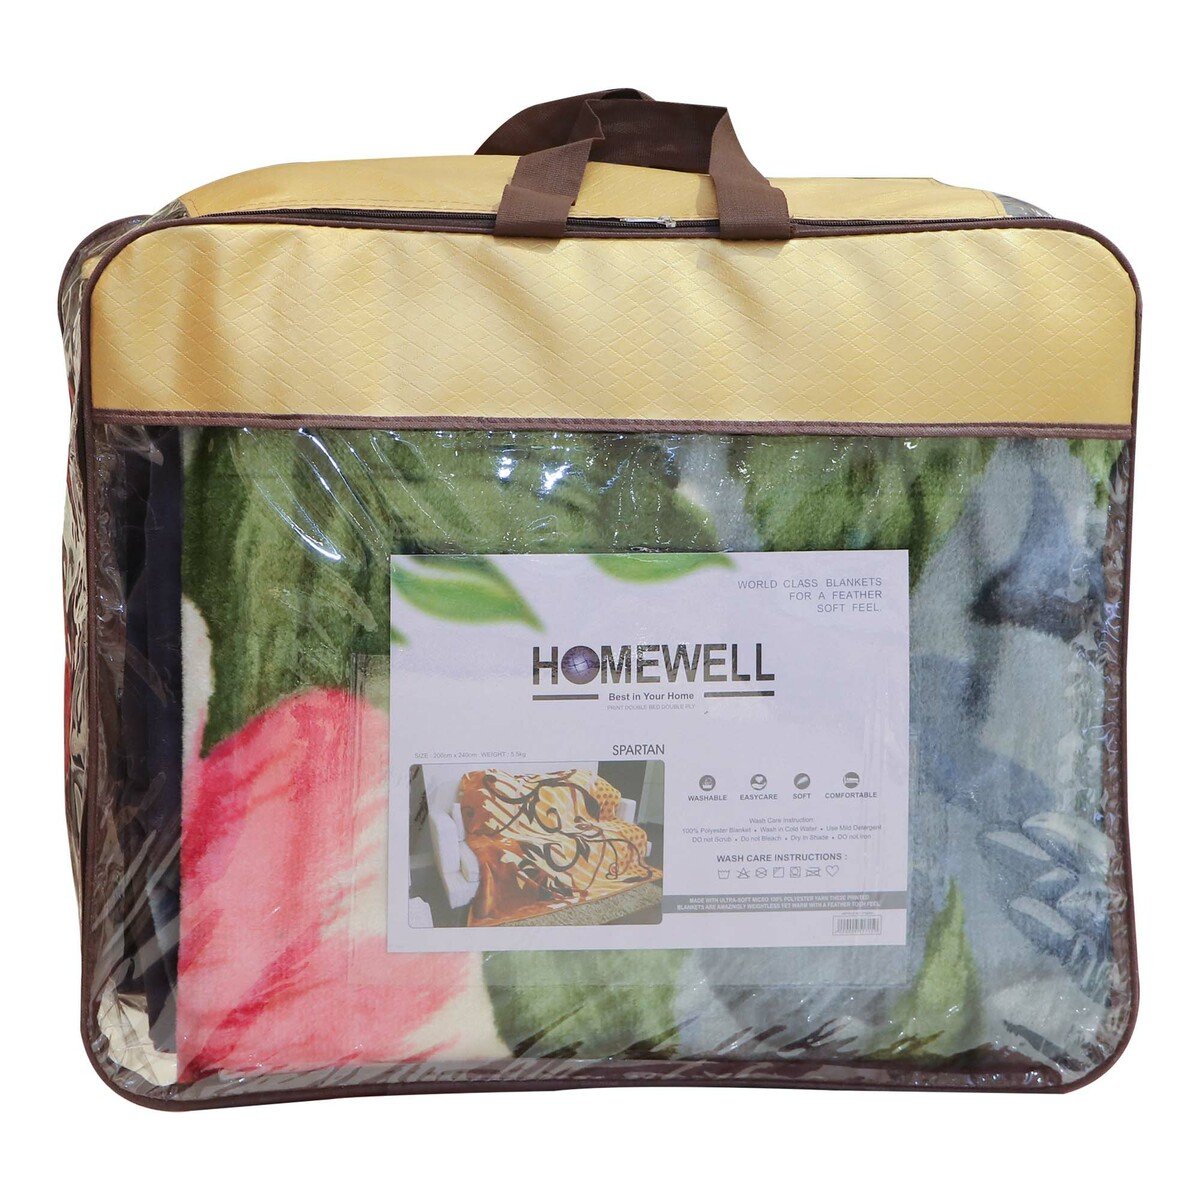 Home Well Blanket 200x240 2ply Assorted